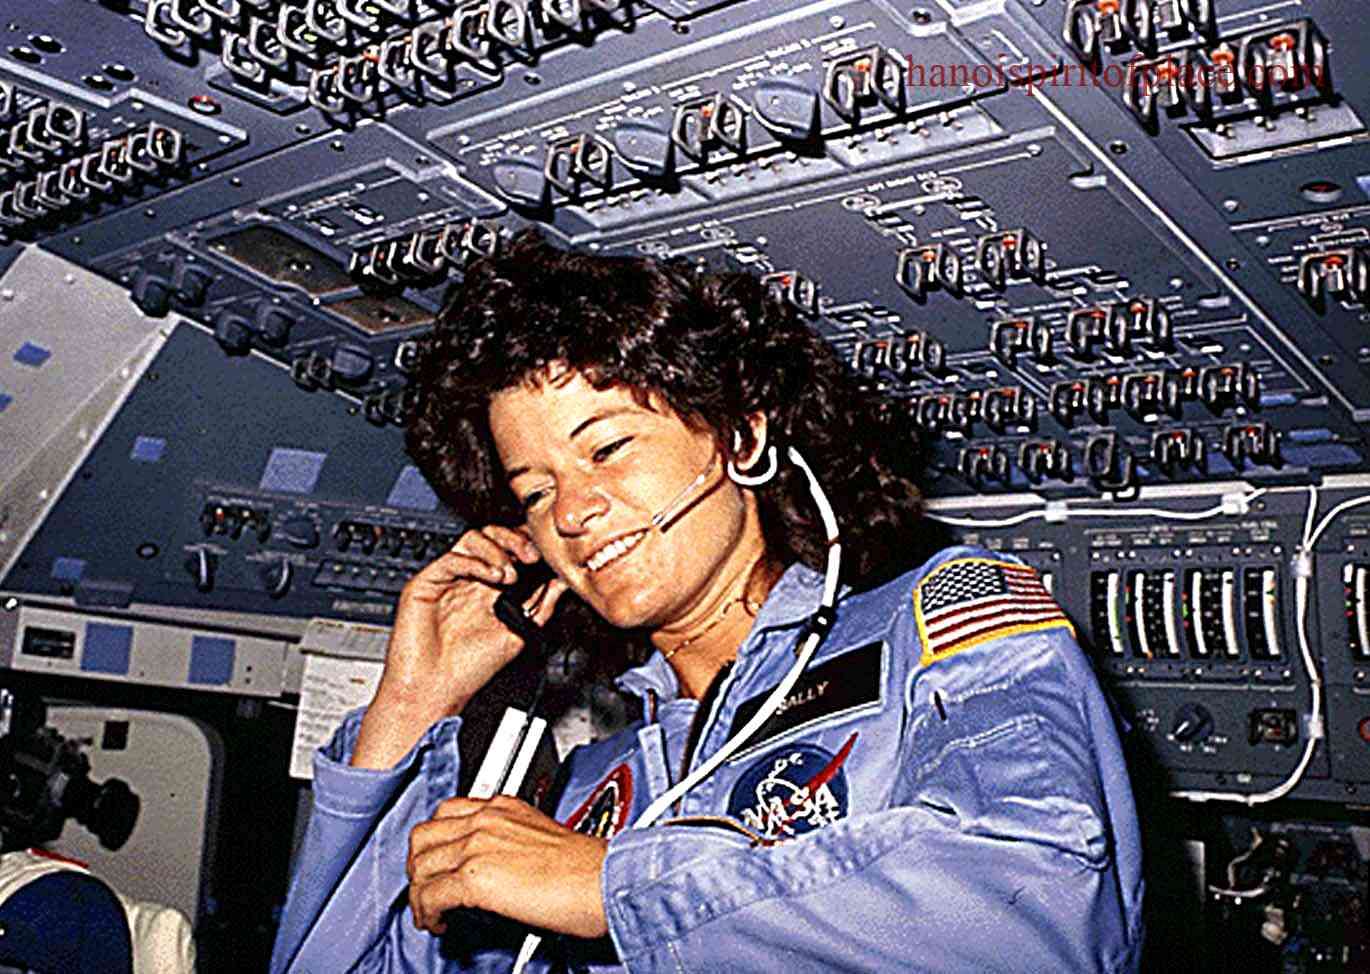 1.1 Sally Ride's significant contributions to space exploration